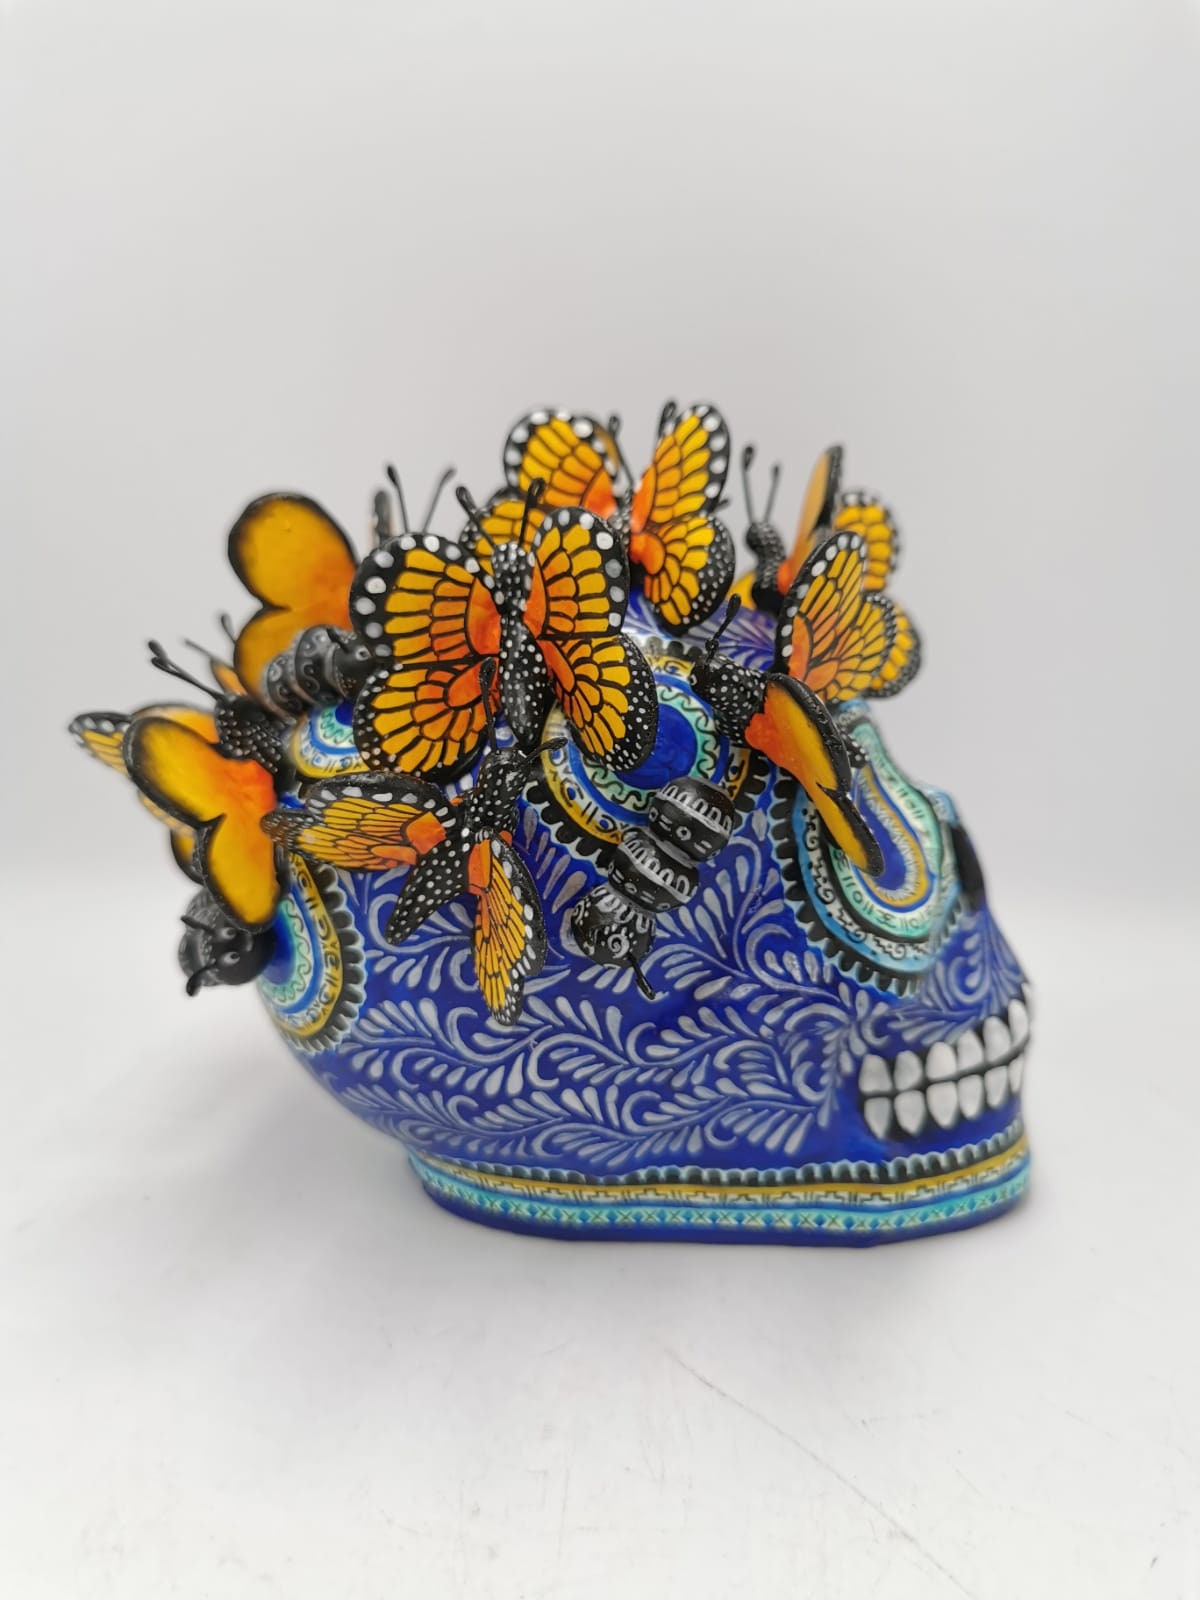 Exquisite Day Of the Dead Ceramic  Butterfly Skull By Alfonso Castillo Hernandez PP4070